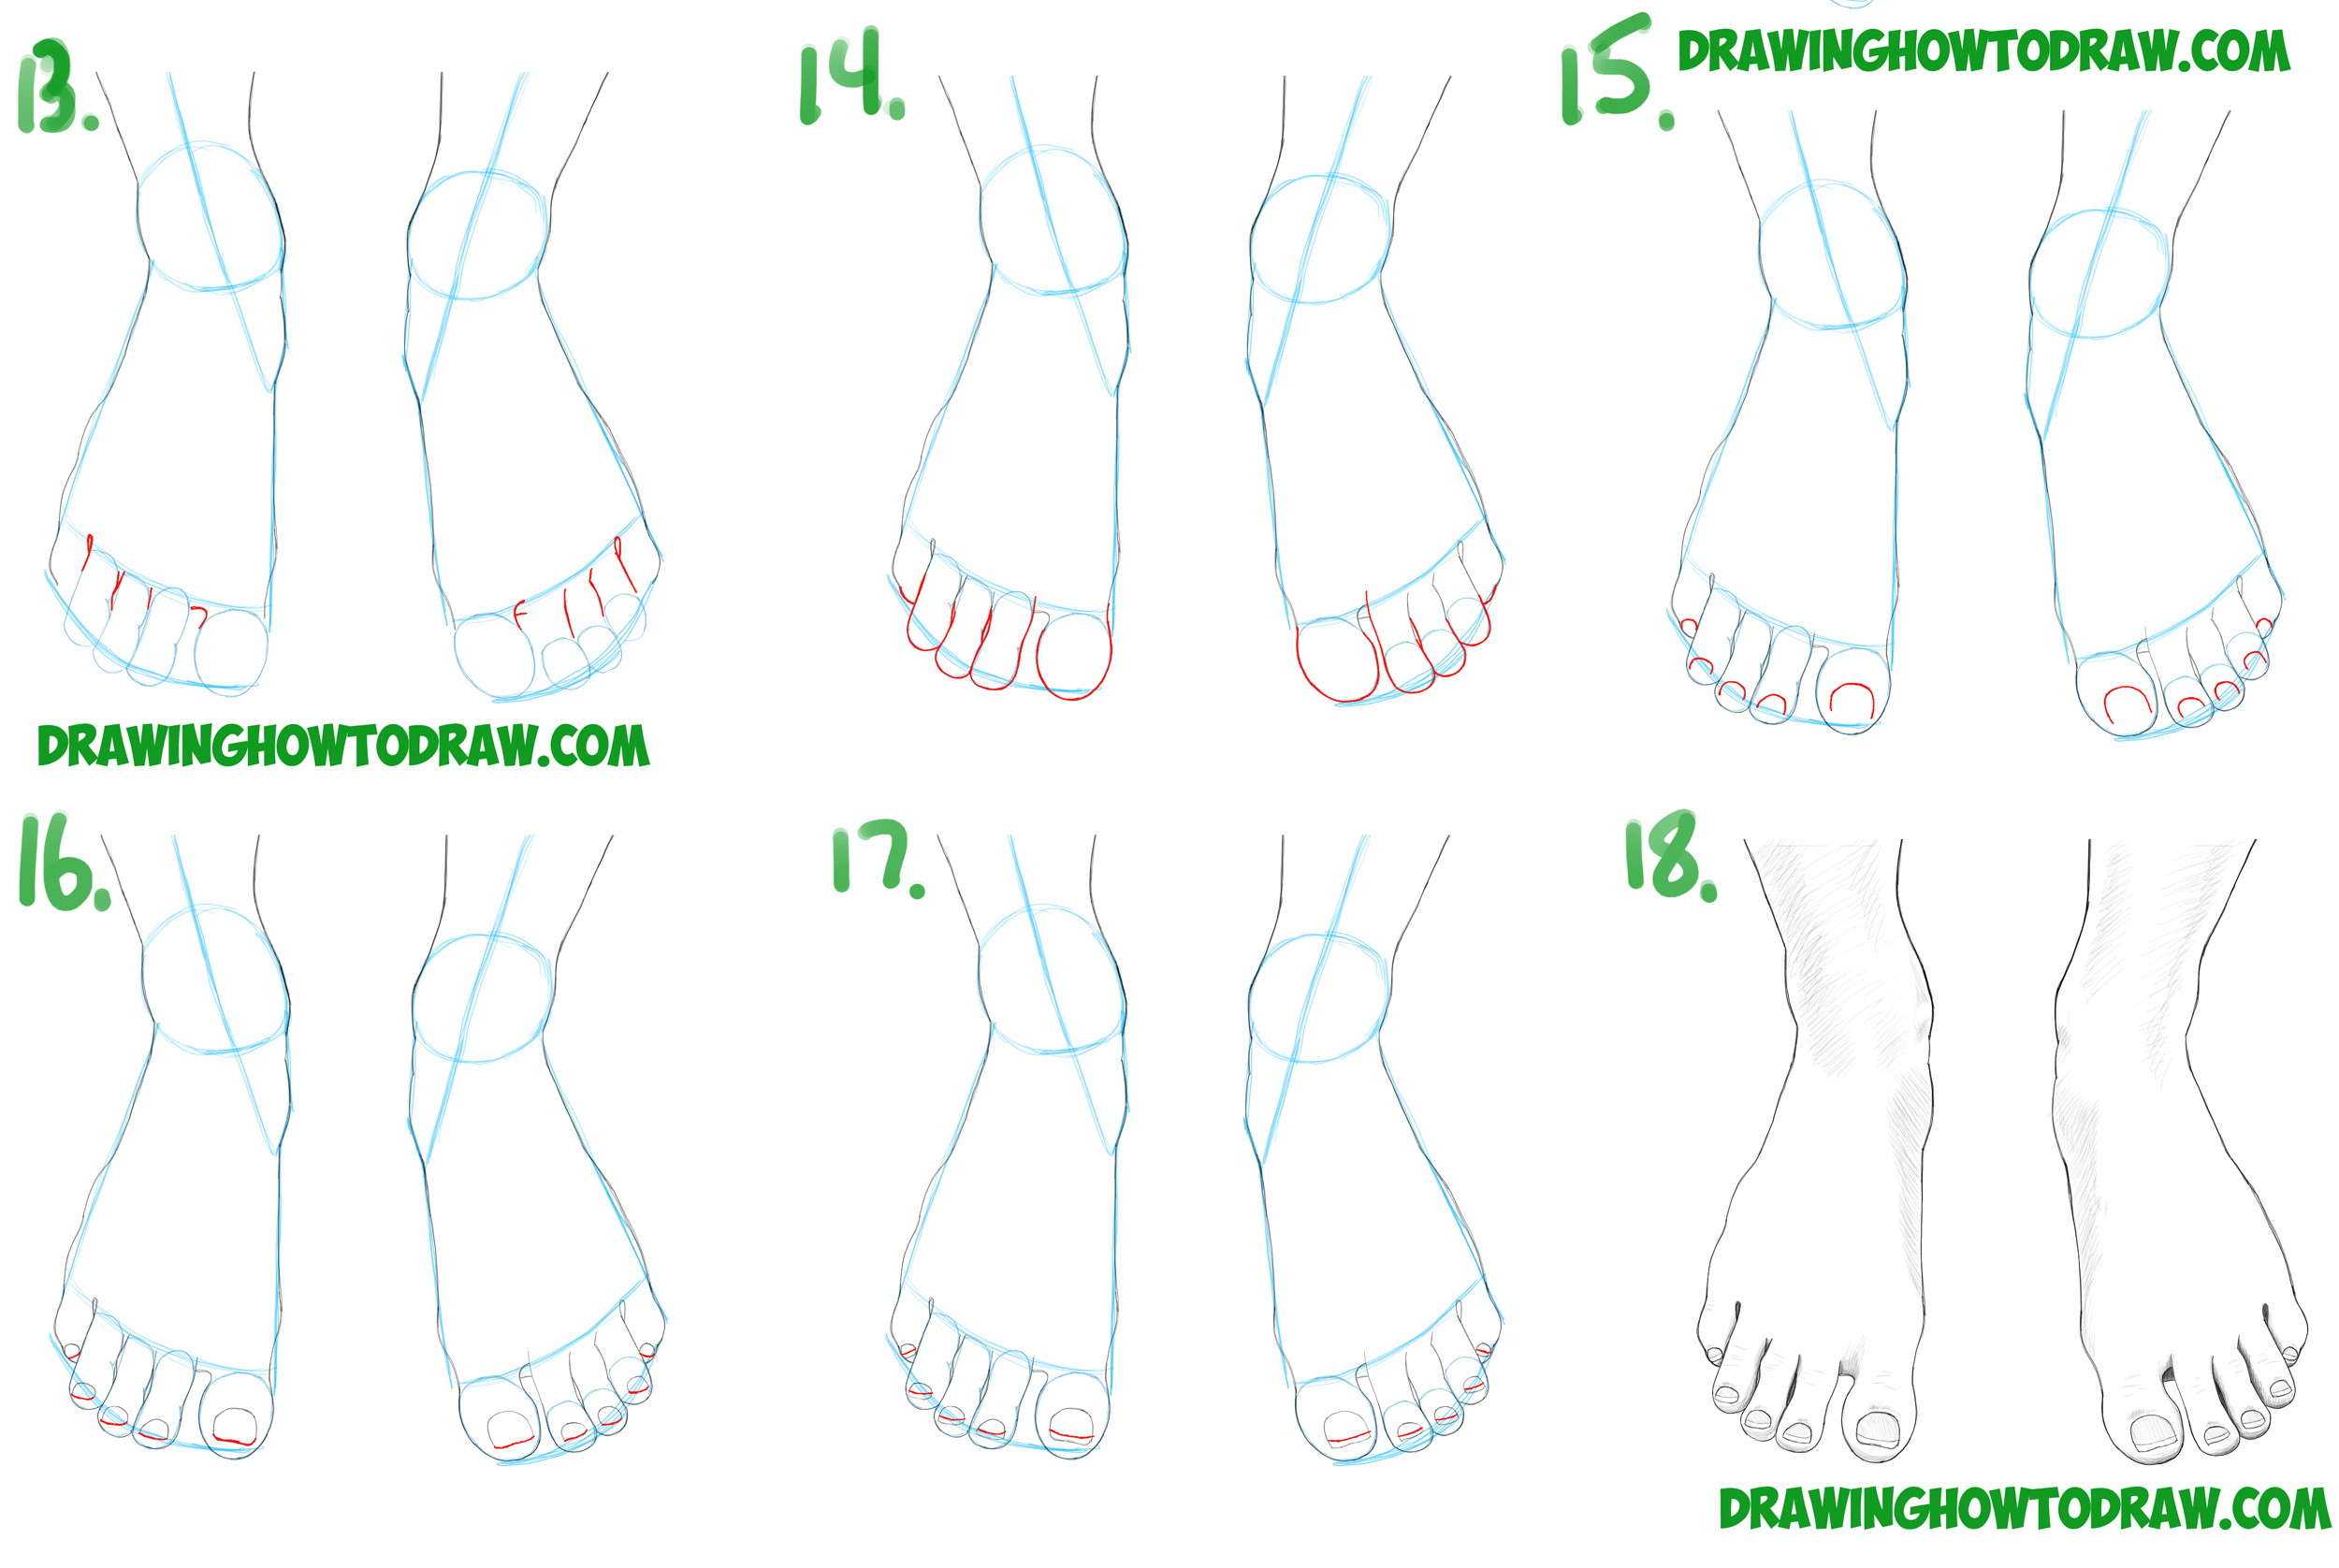 How To Draw Feet The Human Foot With Easy Step By Step Drawing